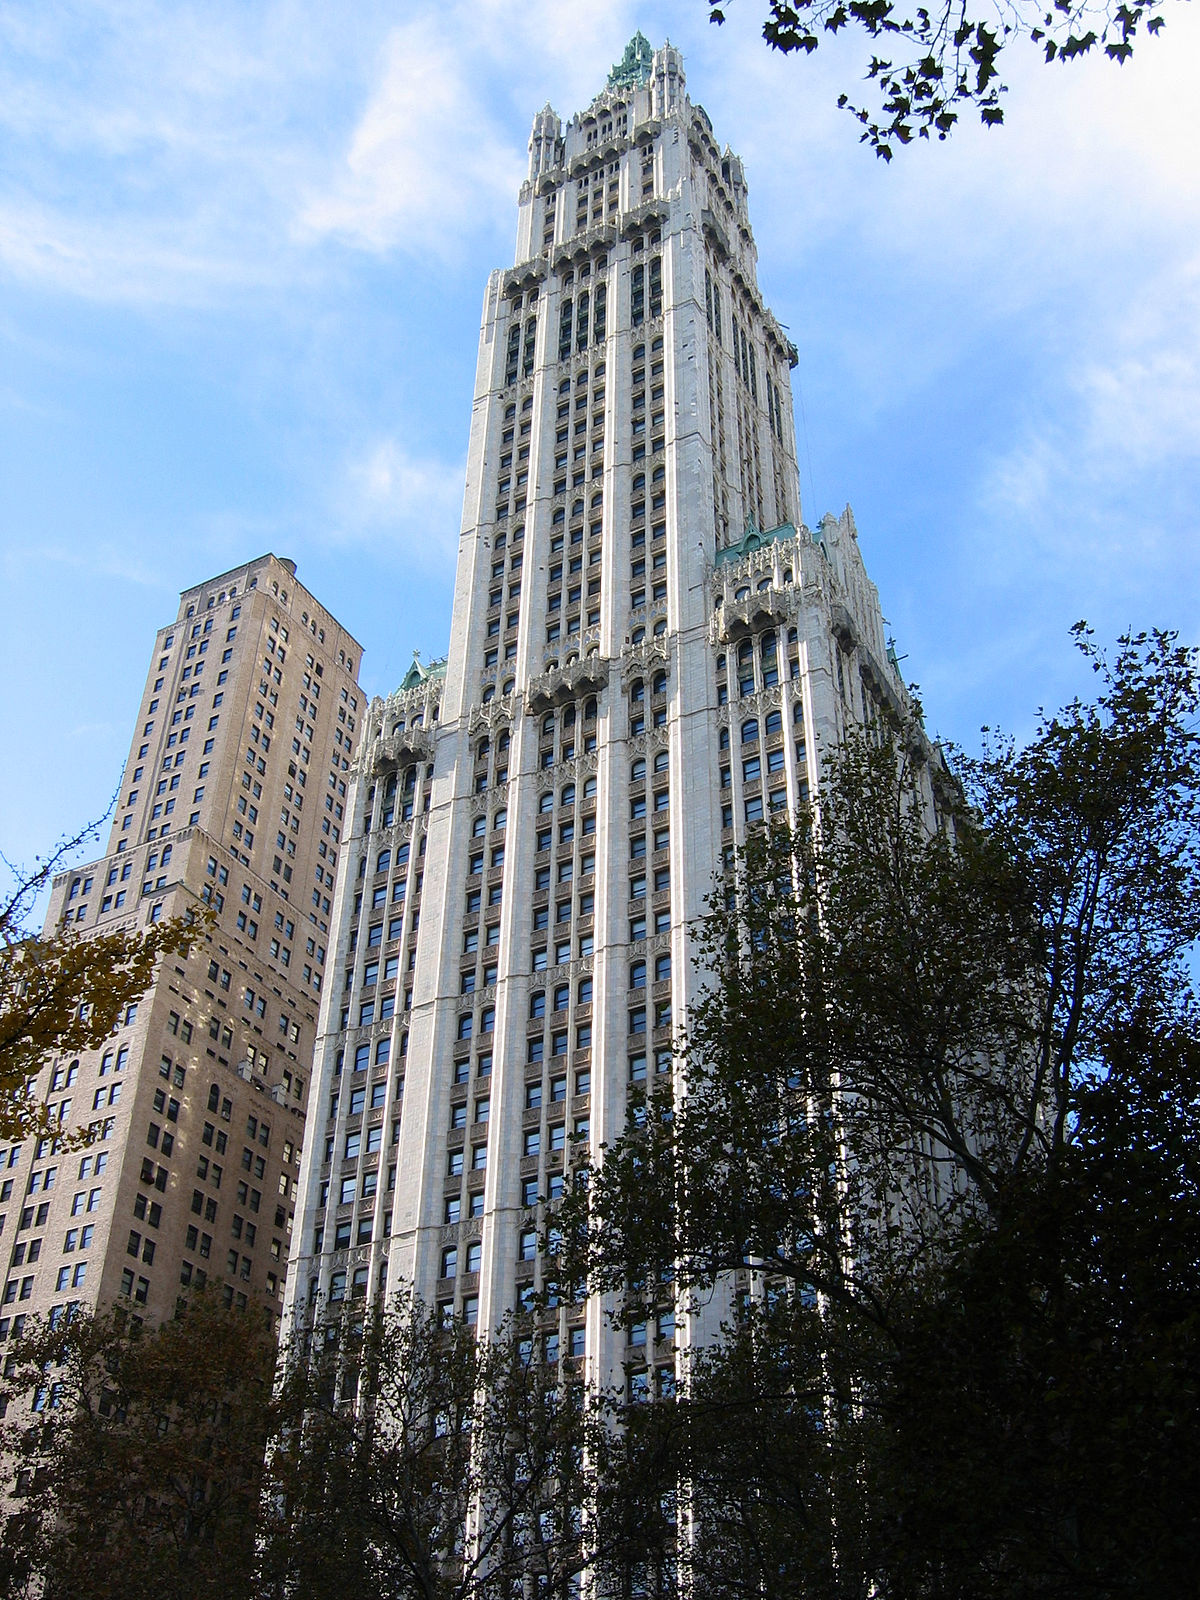 Woolworth Building - Wikipedia